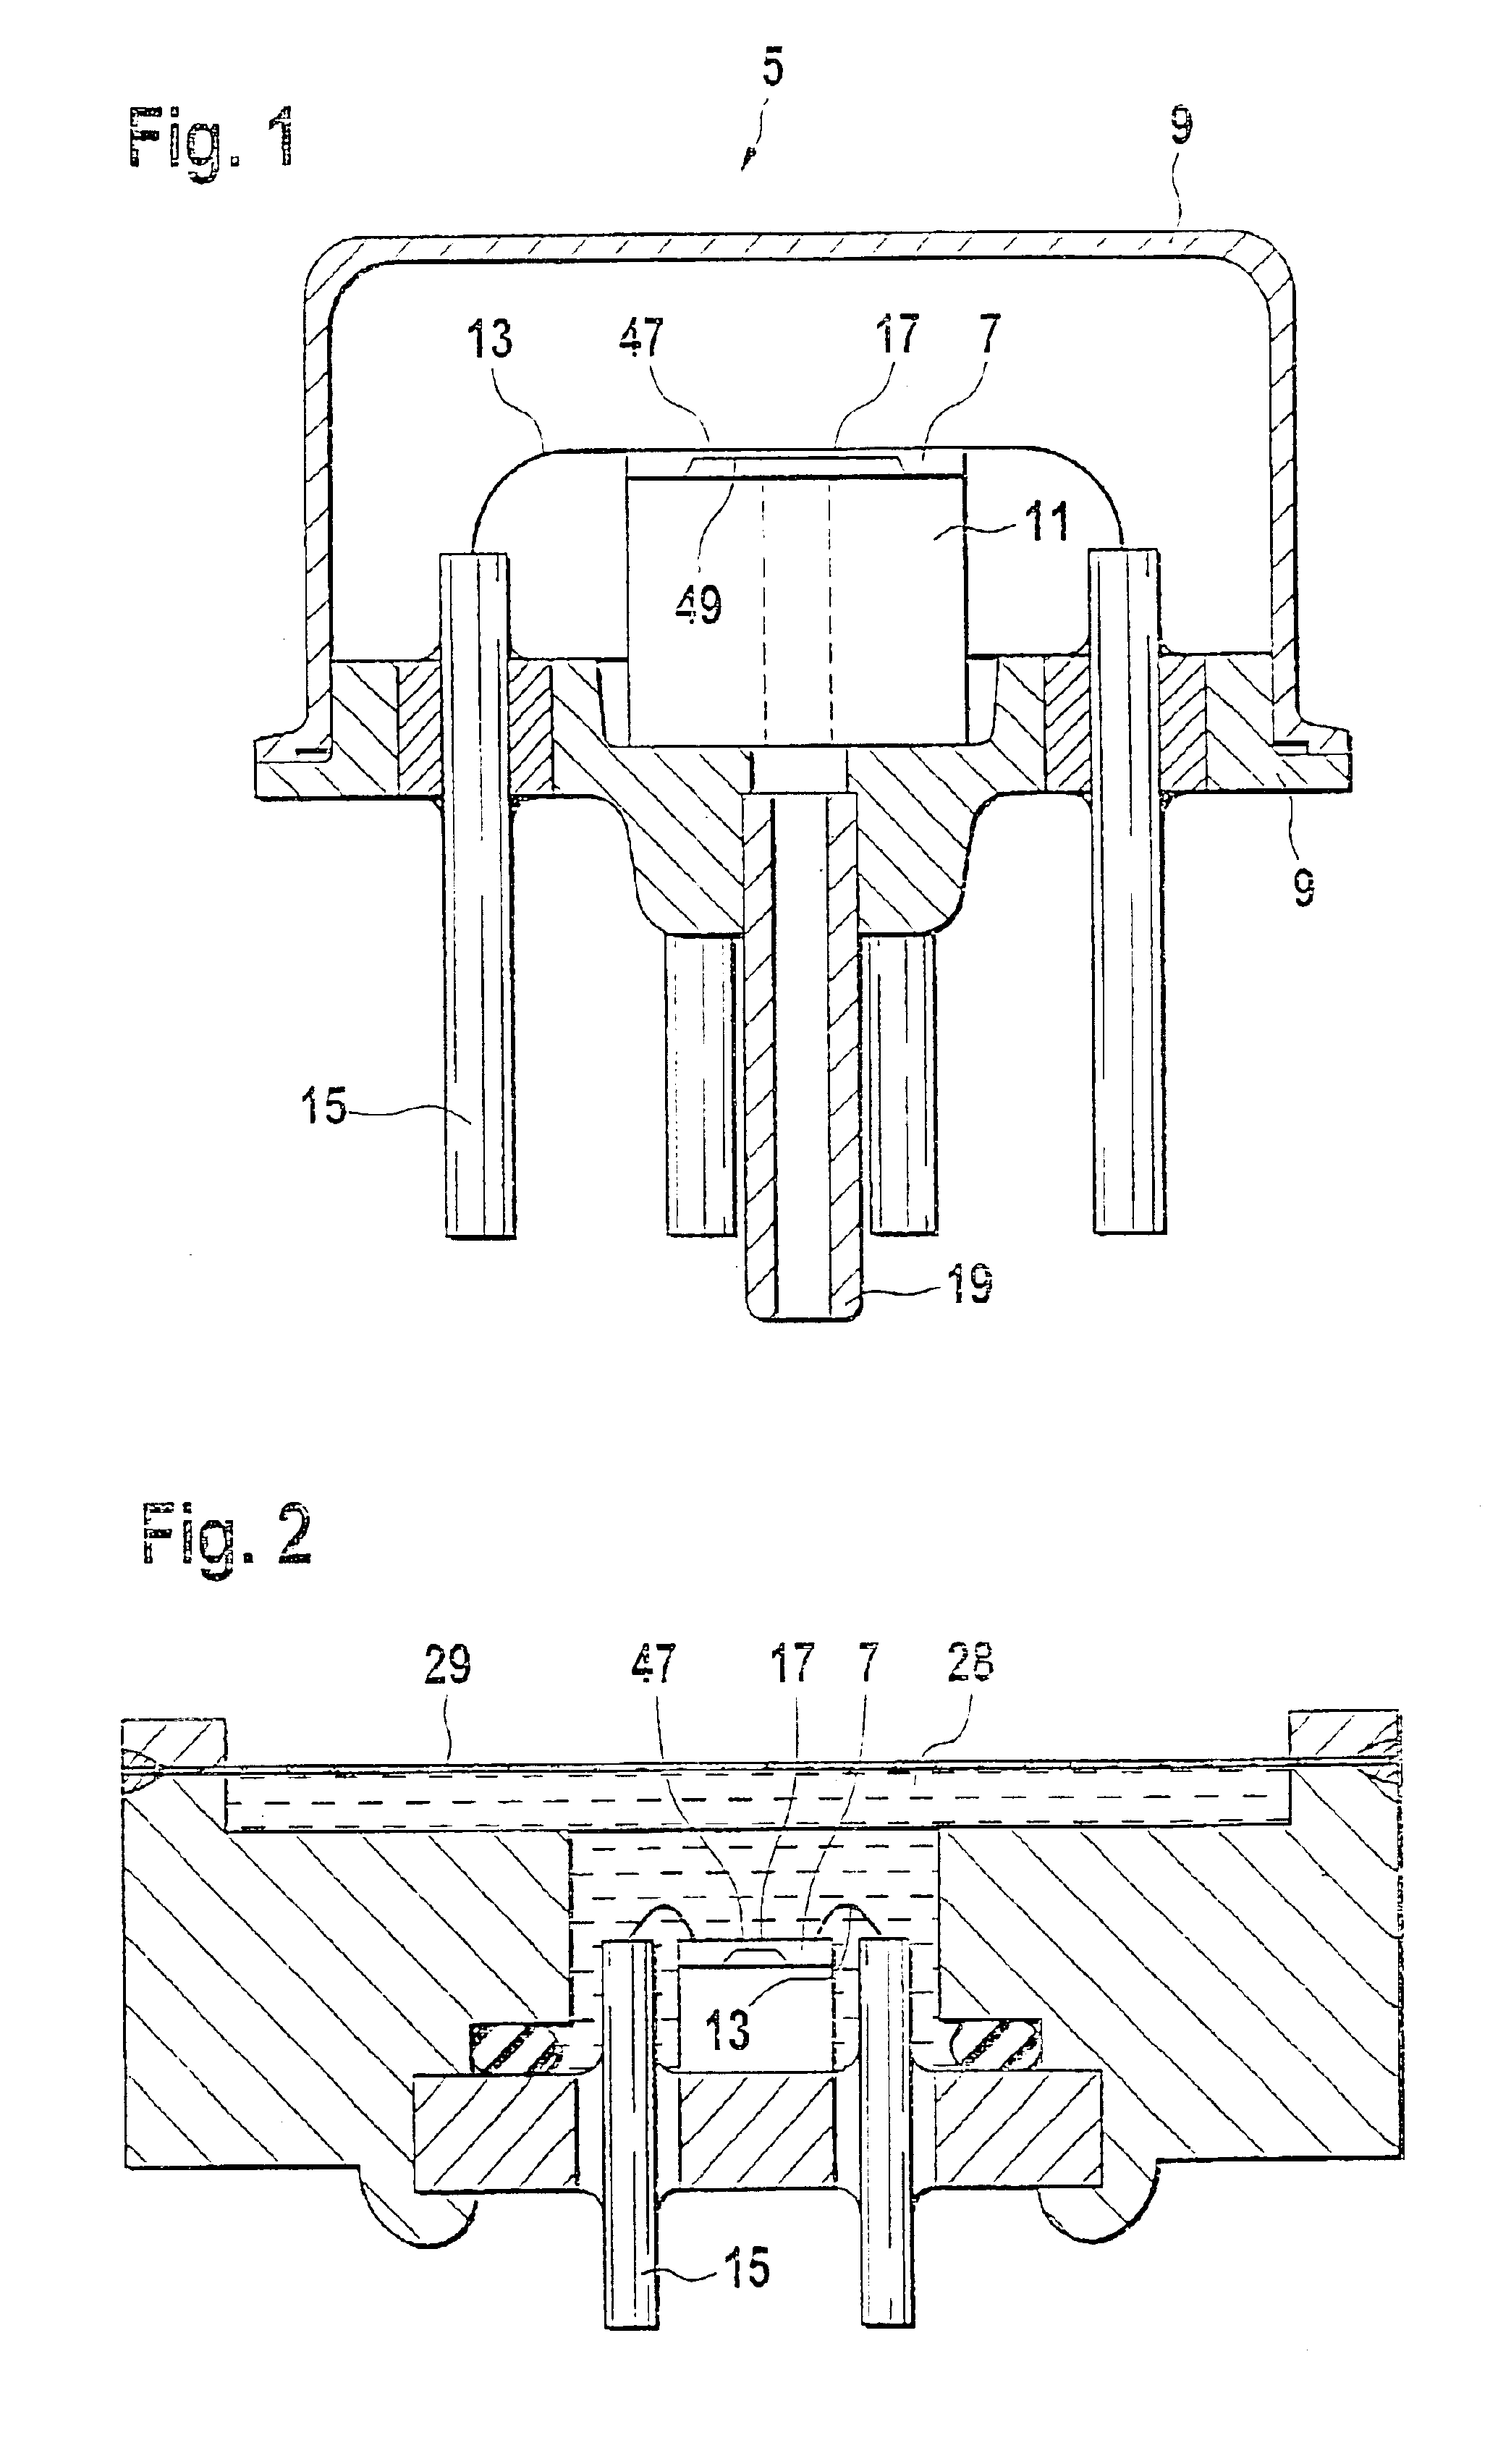 Pressure sensor module with sensor cell and adapter